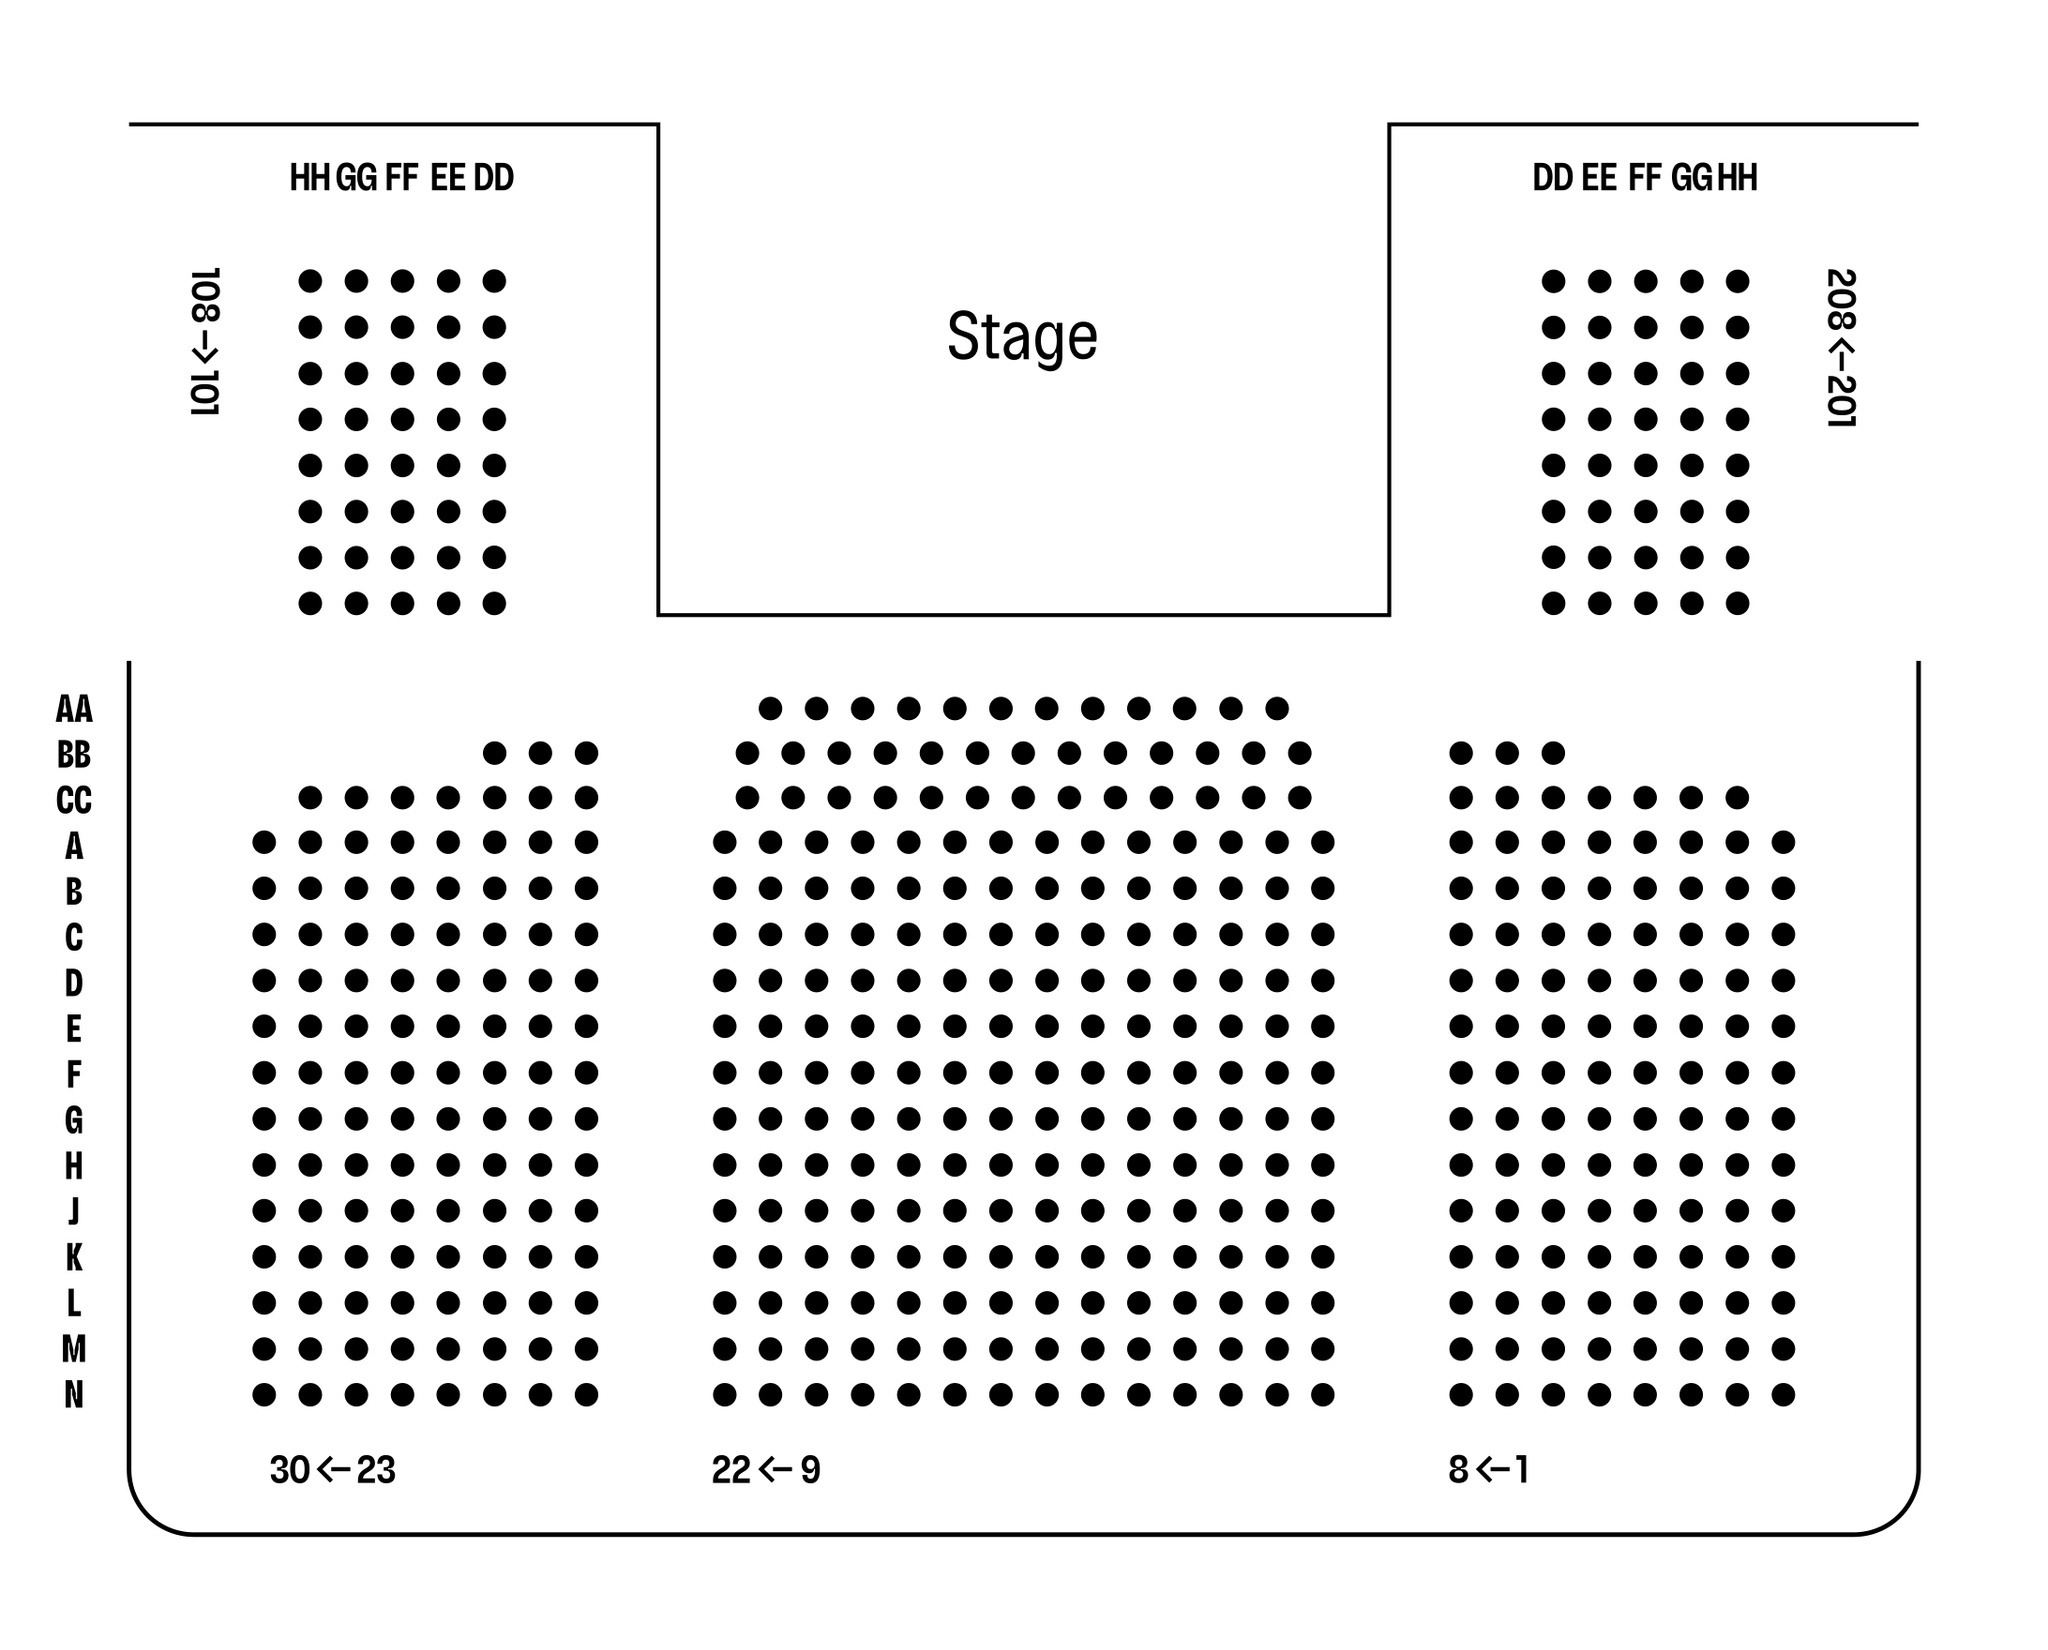 A seat map of the Straight Line Crazy house. It shows a thrust stage with seating on three sides. The majority of seats are in three deep sections in front of the stage, along with five rows of seats on either side.